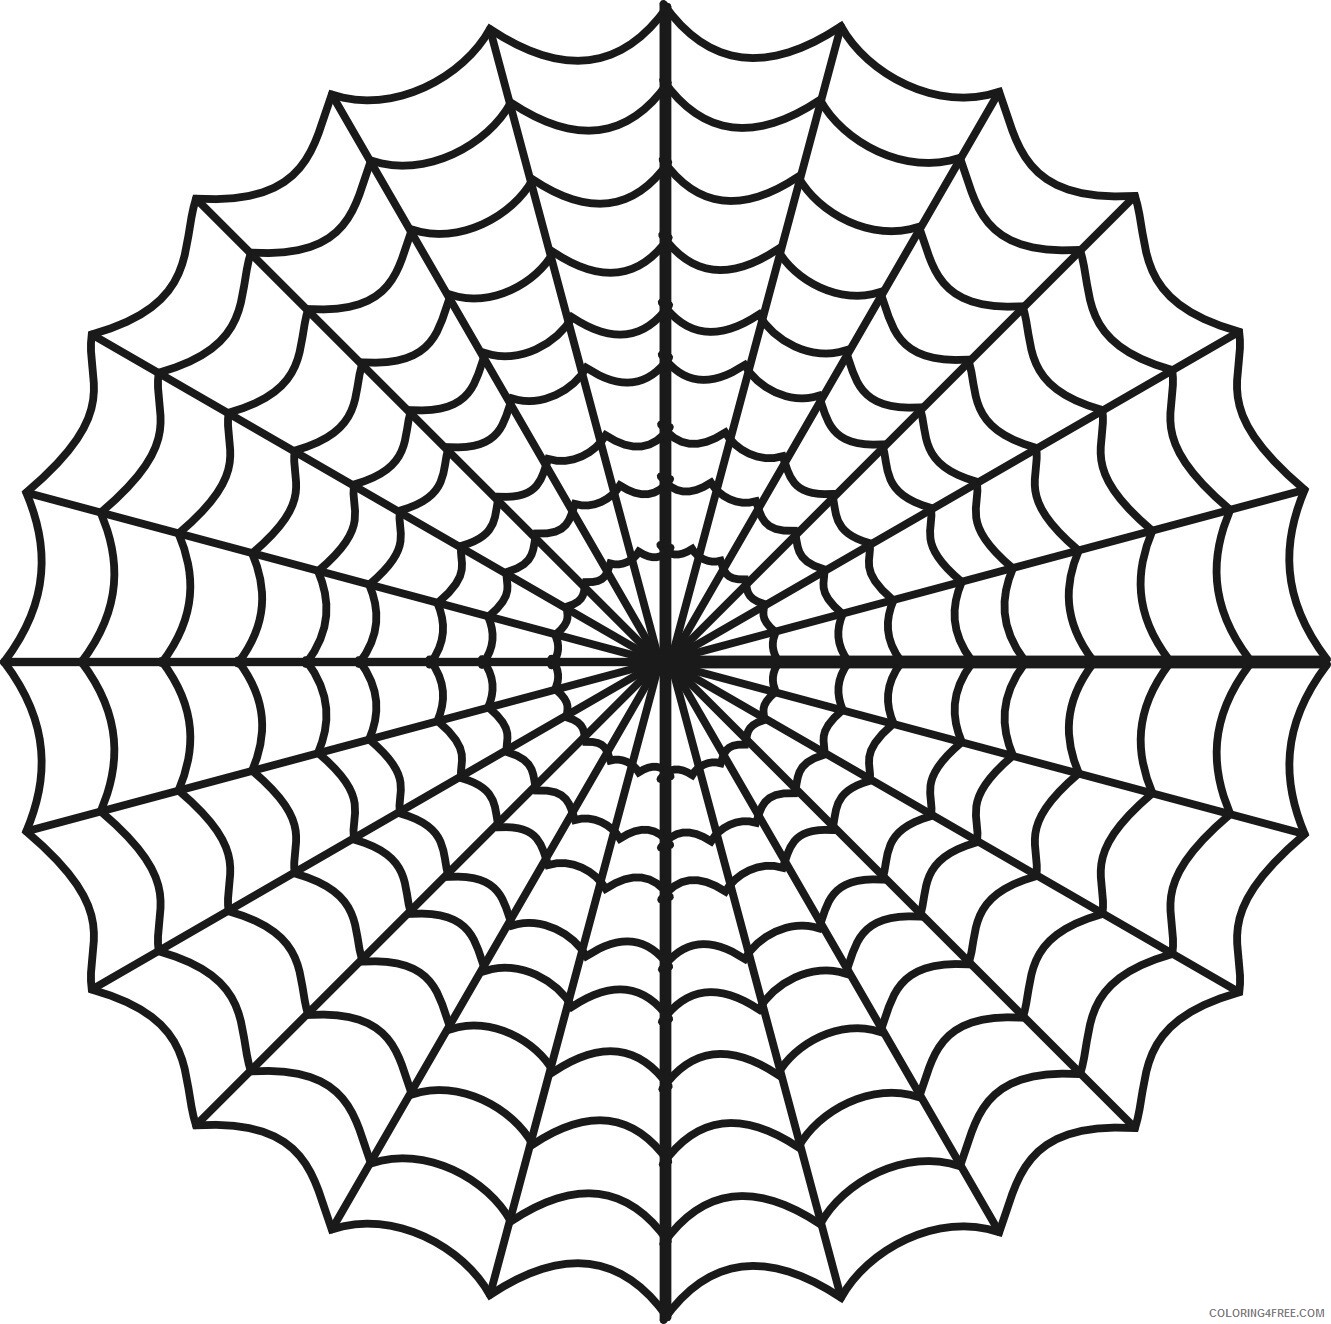 Spider Coloring Pages Animal Printable Sheets Spider Web To Print 2021 4660 Coloring4free